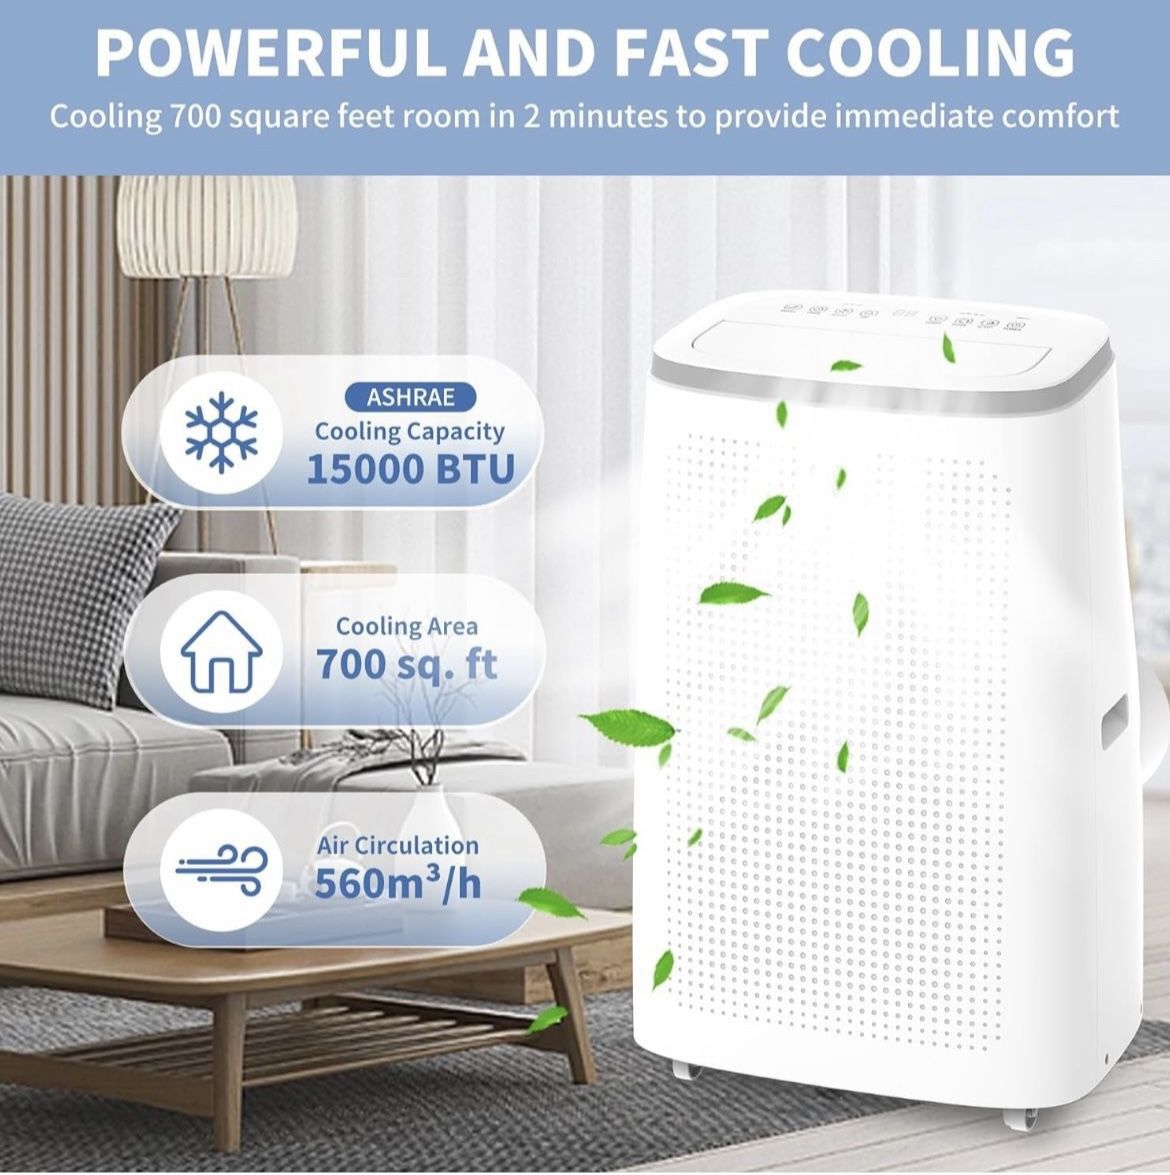 DENBIG 15,000 BTU Portable Air Conditioners, 3-in-1 Portable AC with Dehumidifier/Fan/Sleep Modes for Rooms Up to 700 Sq. Ft, with 24-Hour Timer & Rem